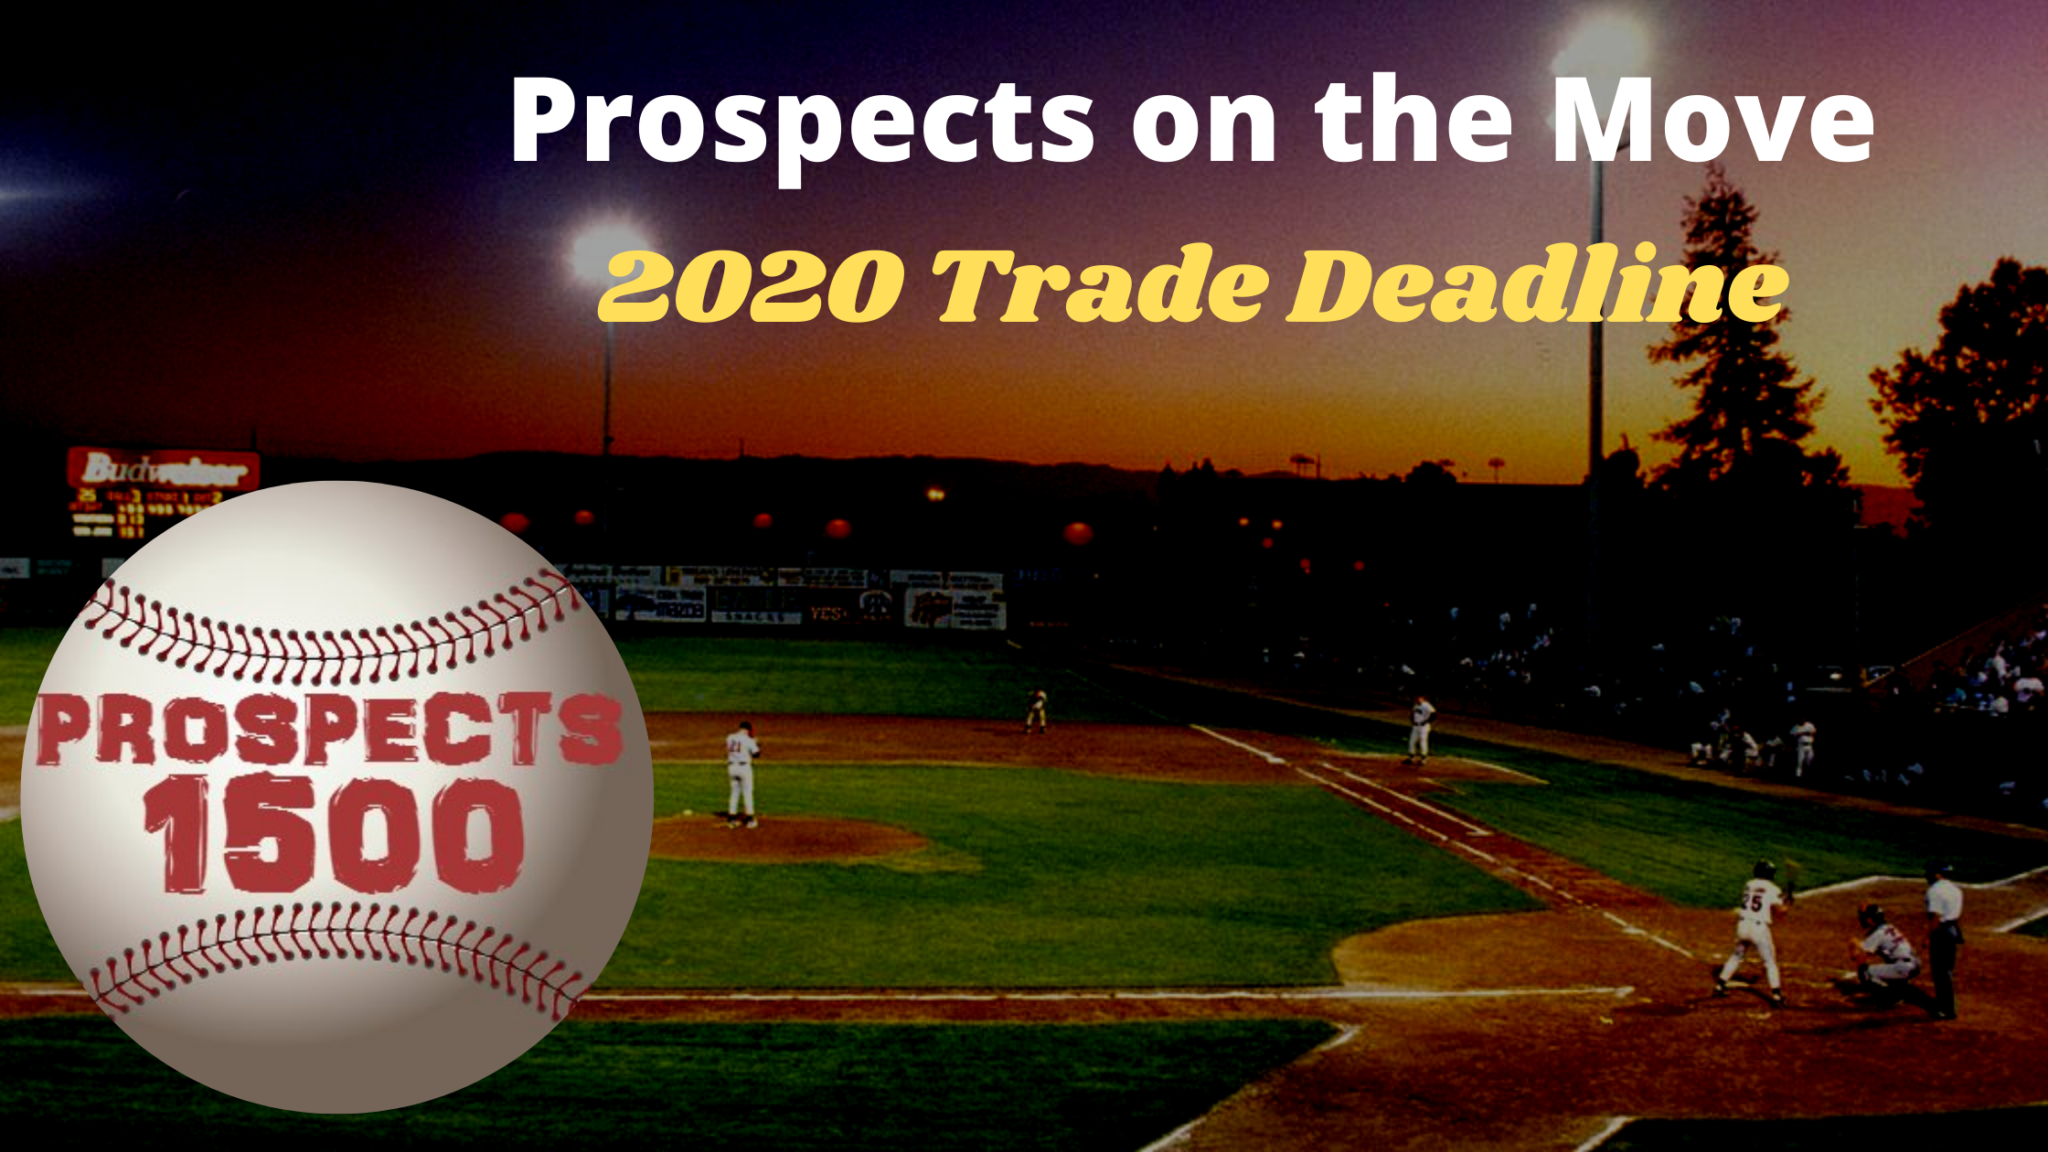 Prospects on the Move (2020 Trade Deadline)